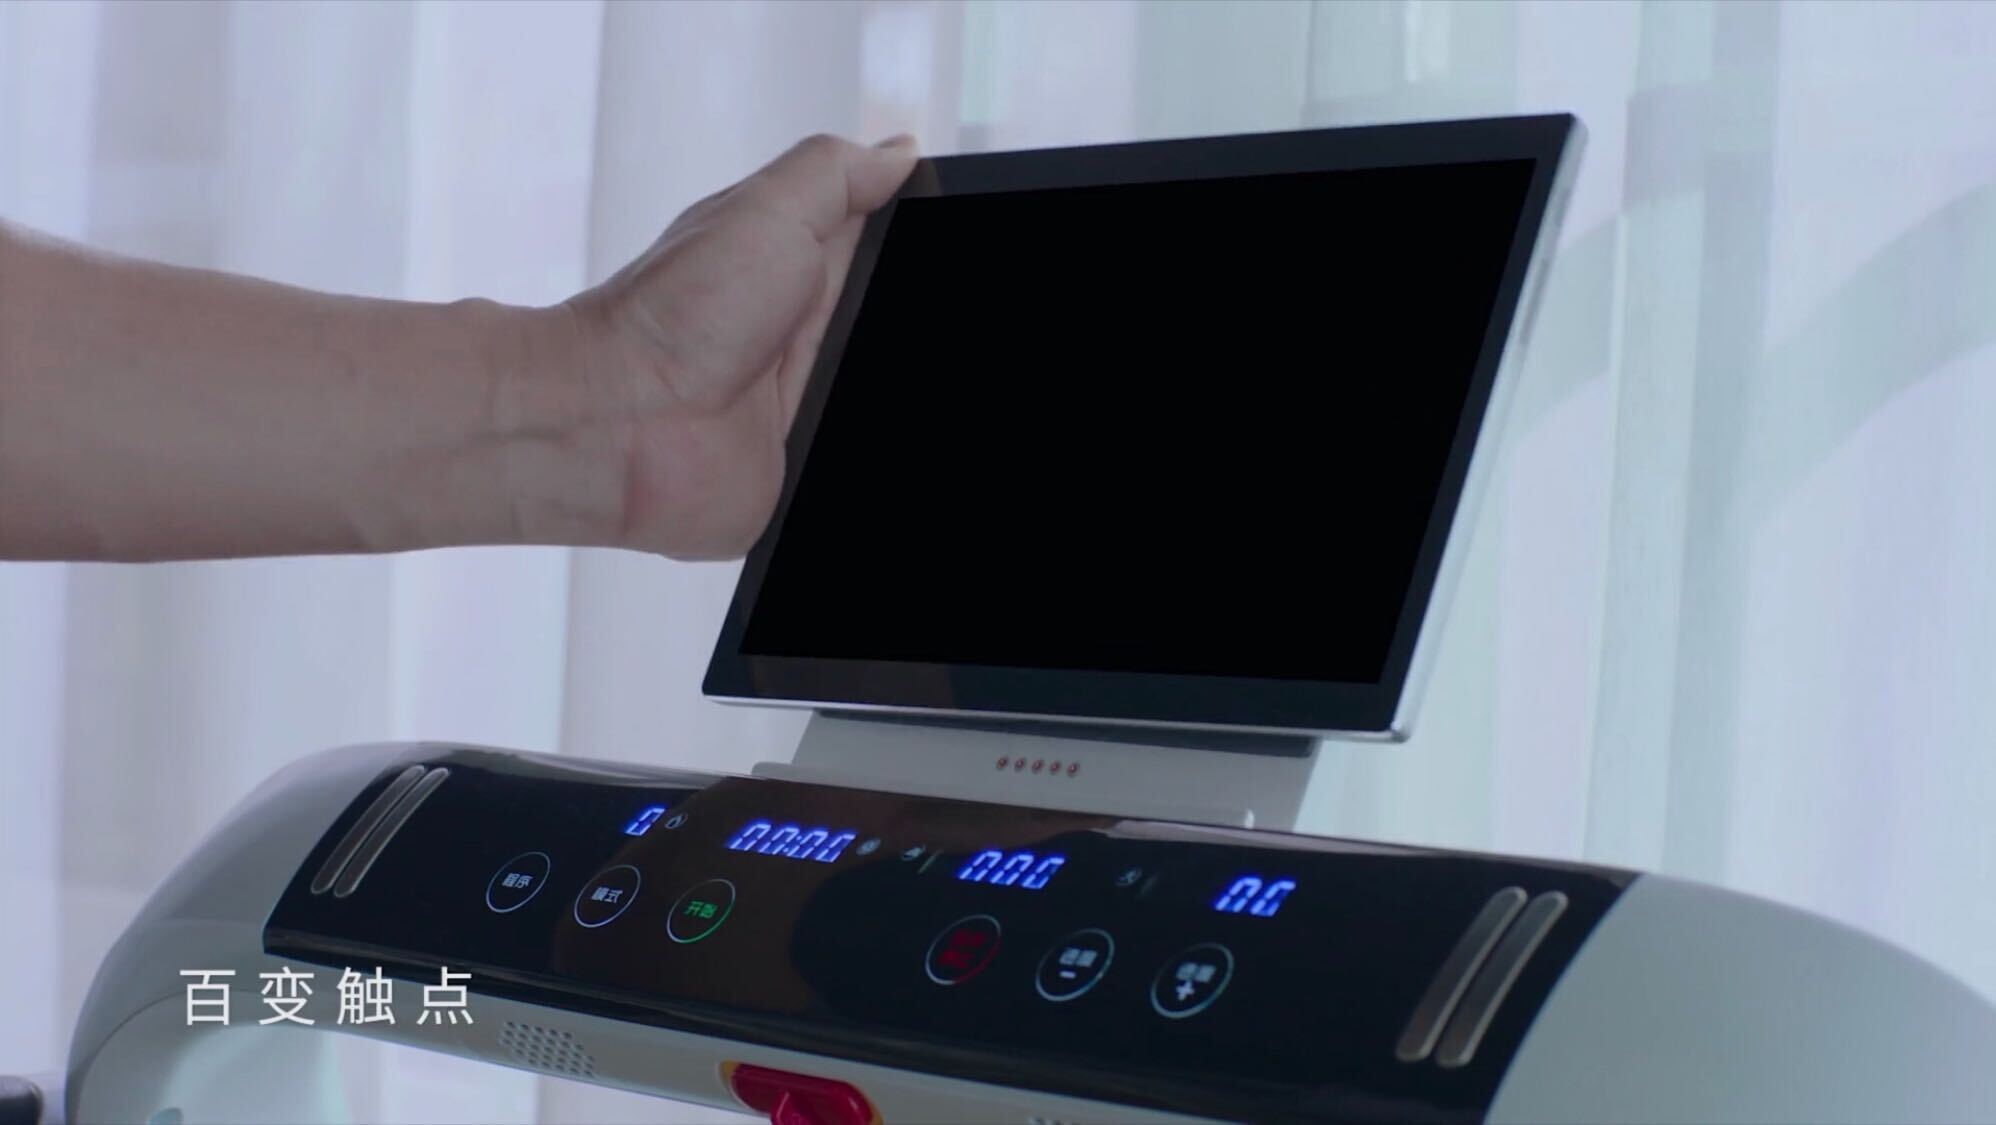 One use case: Attaching the portable Swaiot Panel to a treadmill. (Picture: Skyworth)